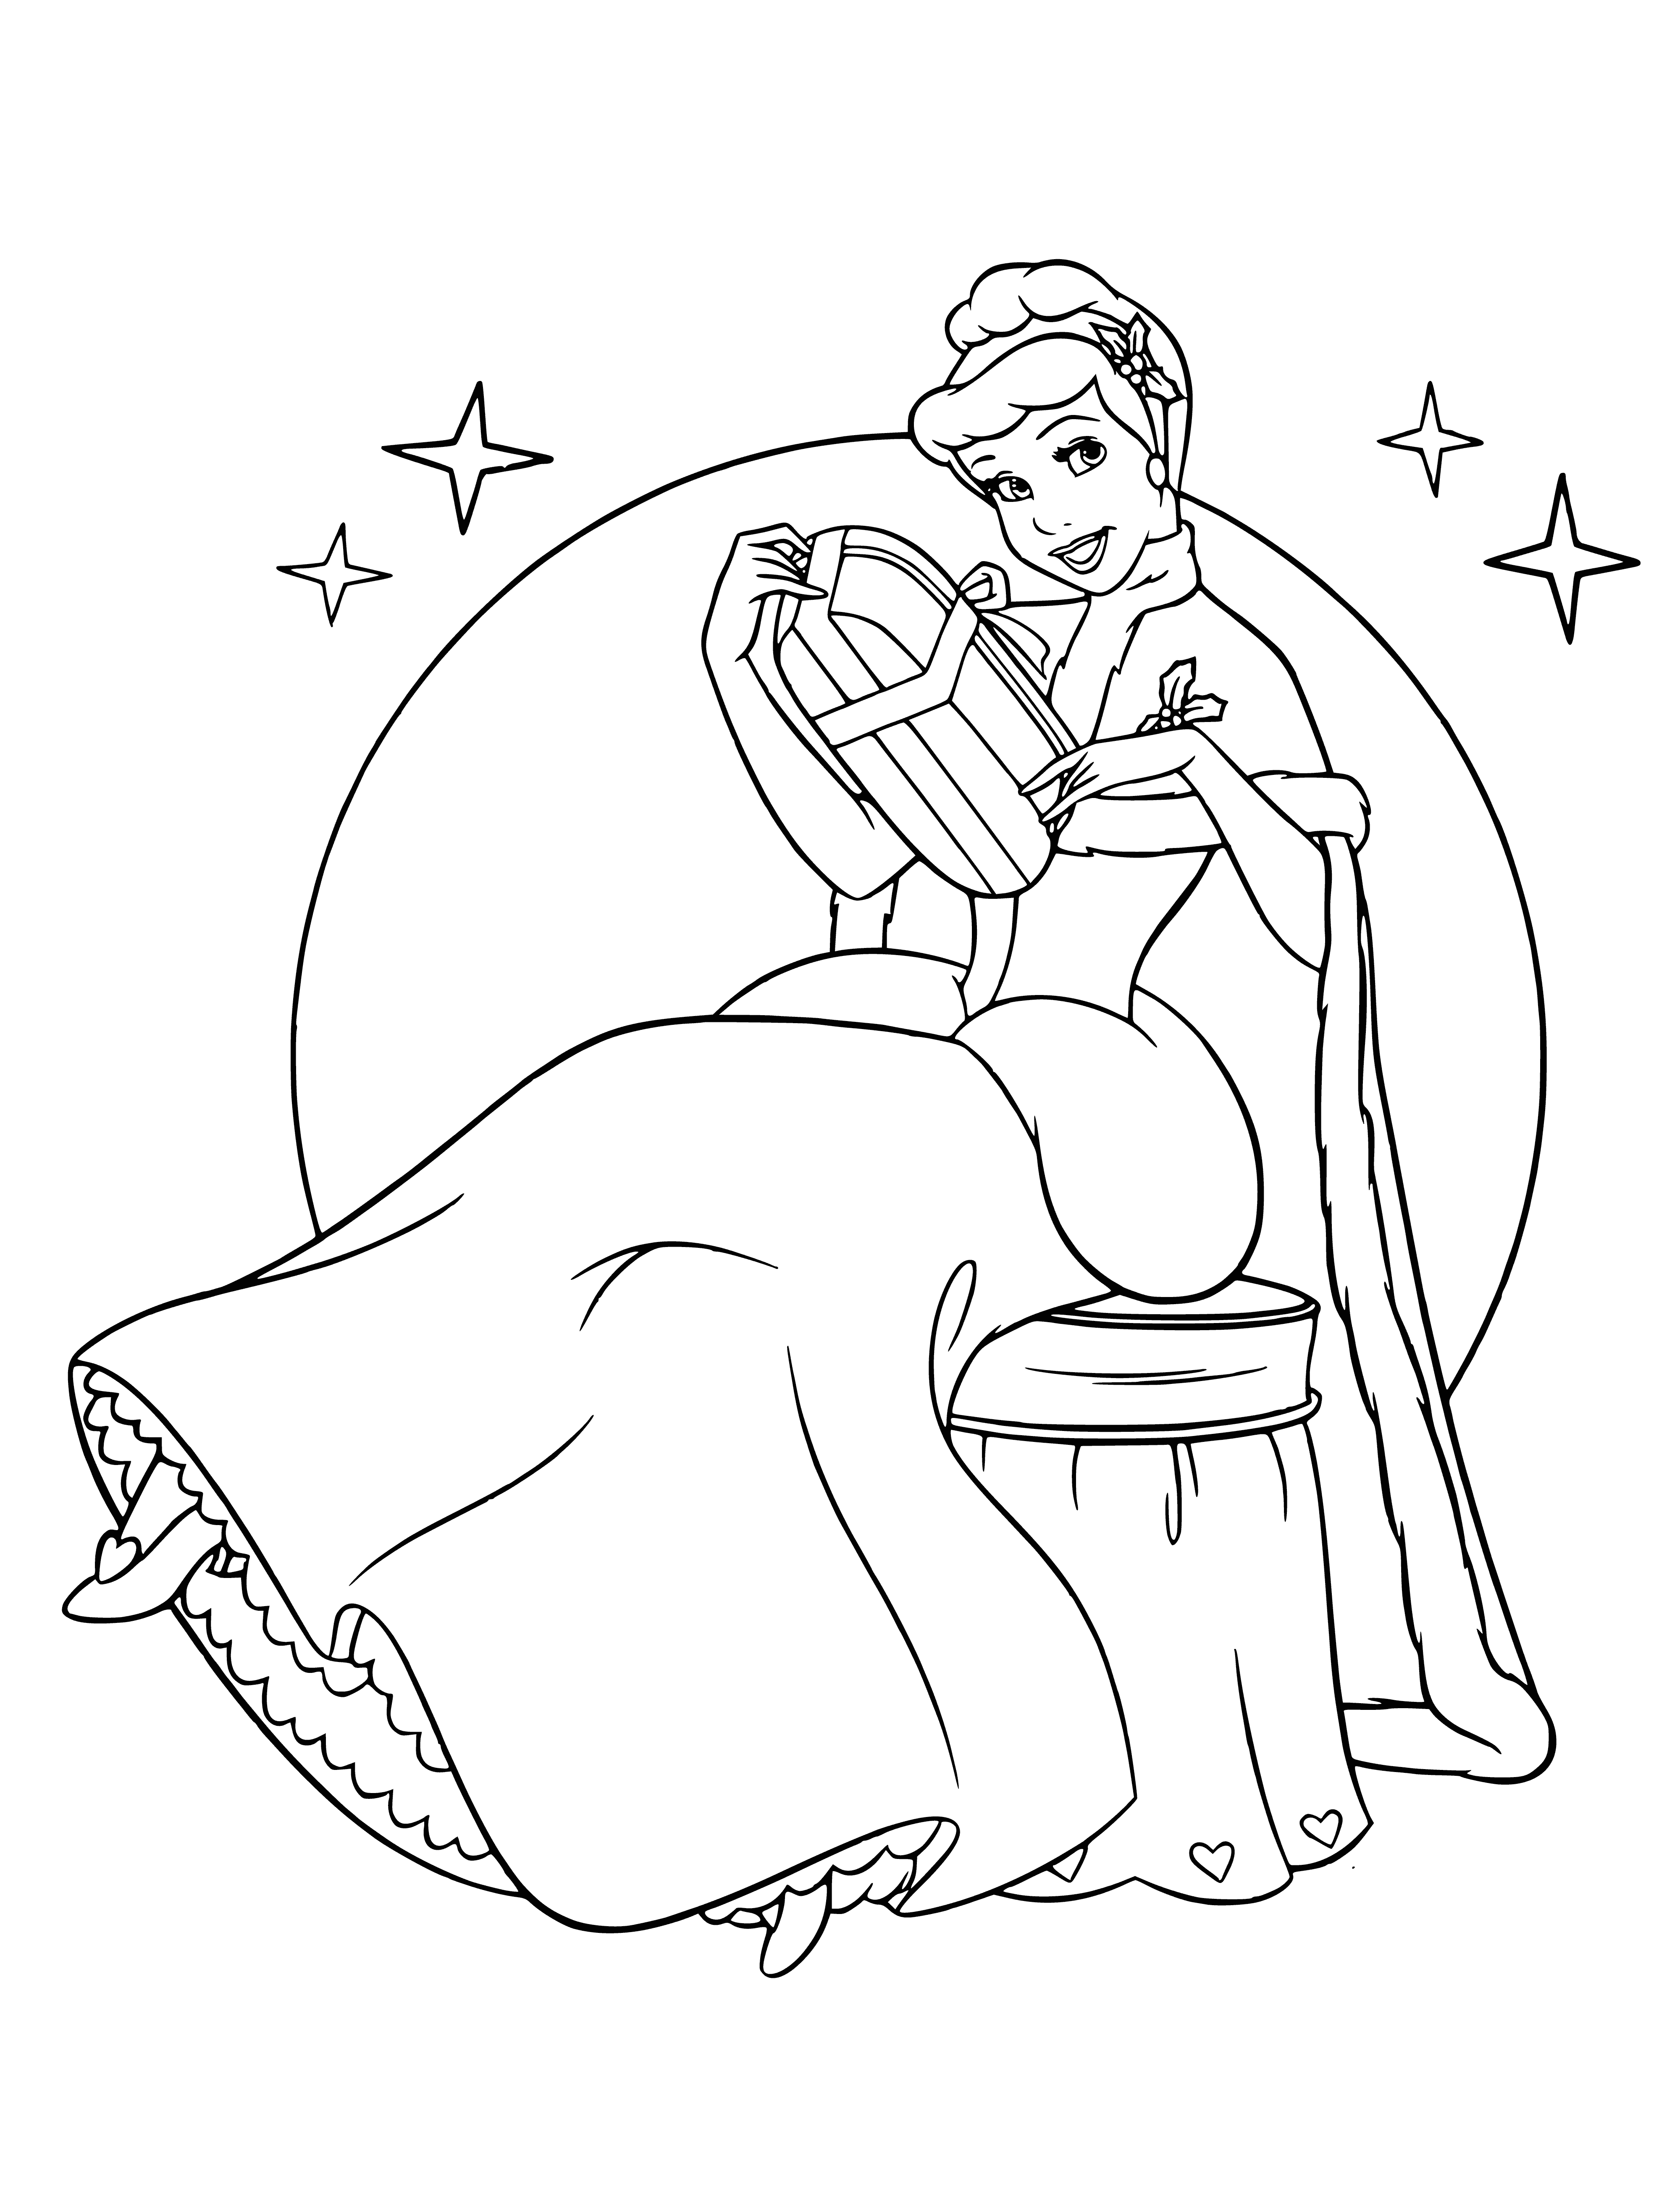 coloring page: Disney princesses ring in the New Year. Cinderella presents a gift; all wearing crowns and holding hands, looking very pretty.